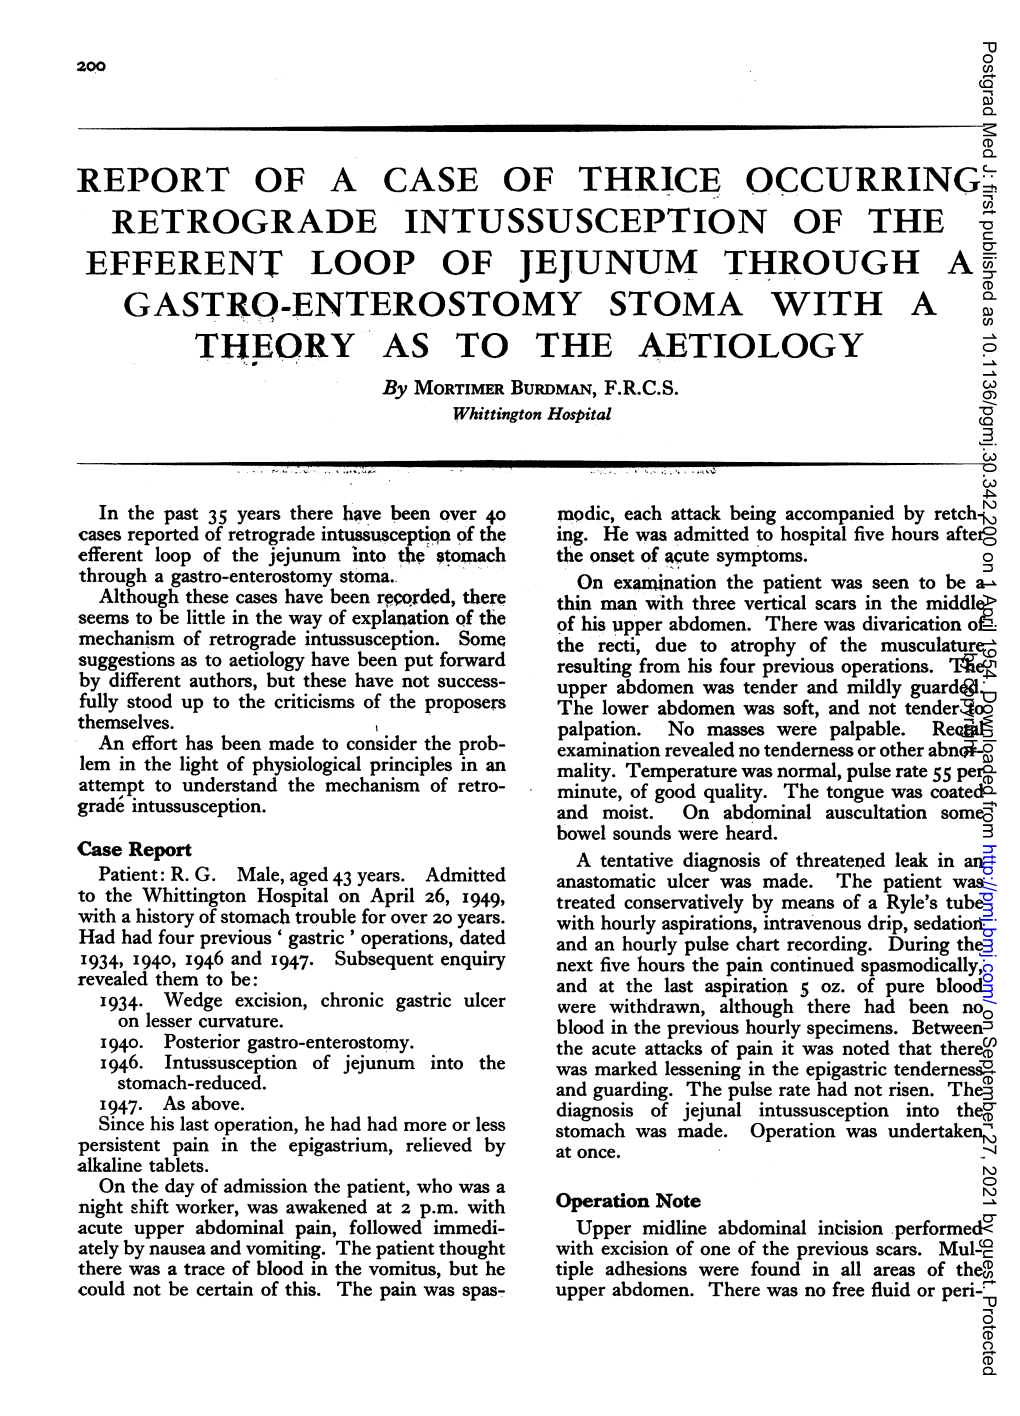 EFFERENT LOOP of JEJUNUM THROUGH a GASTRO-ENTEROSTOMY STOMA with a THEORY AS to the AETIOLOGY by MORTIMER BURDMAN, F.R.C.S